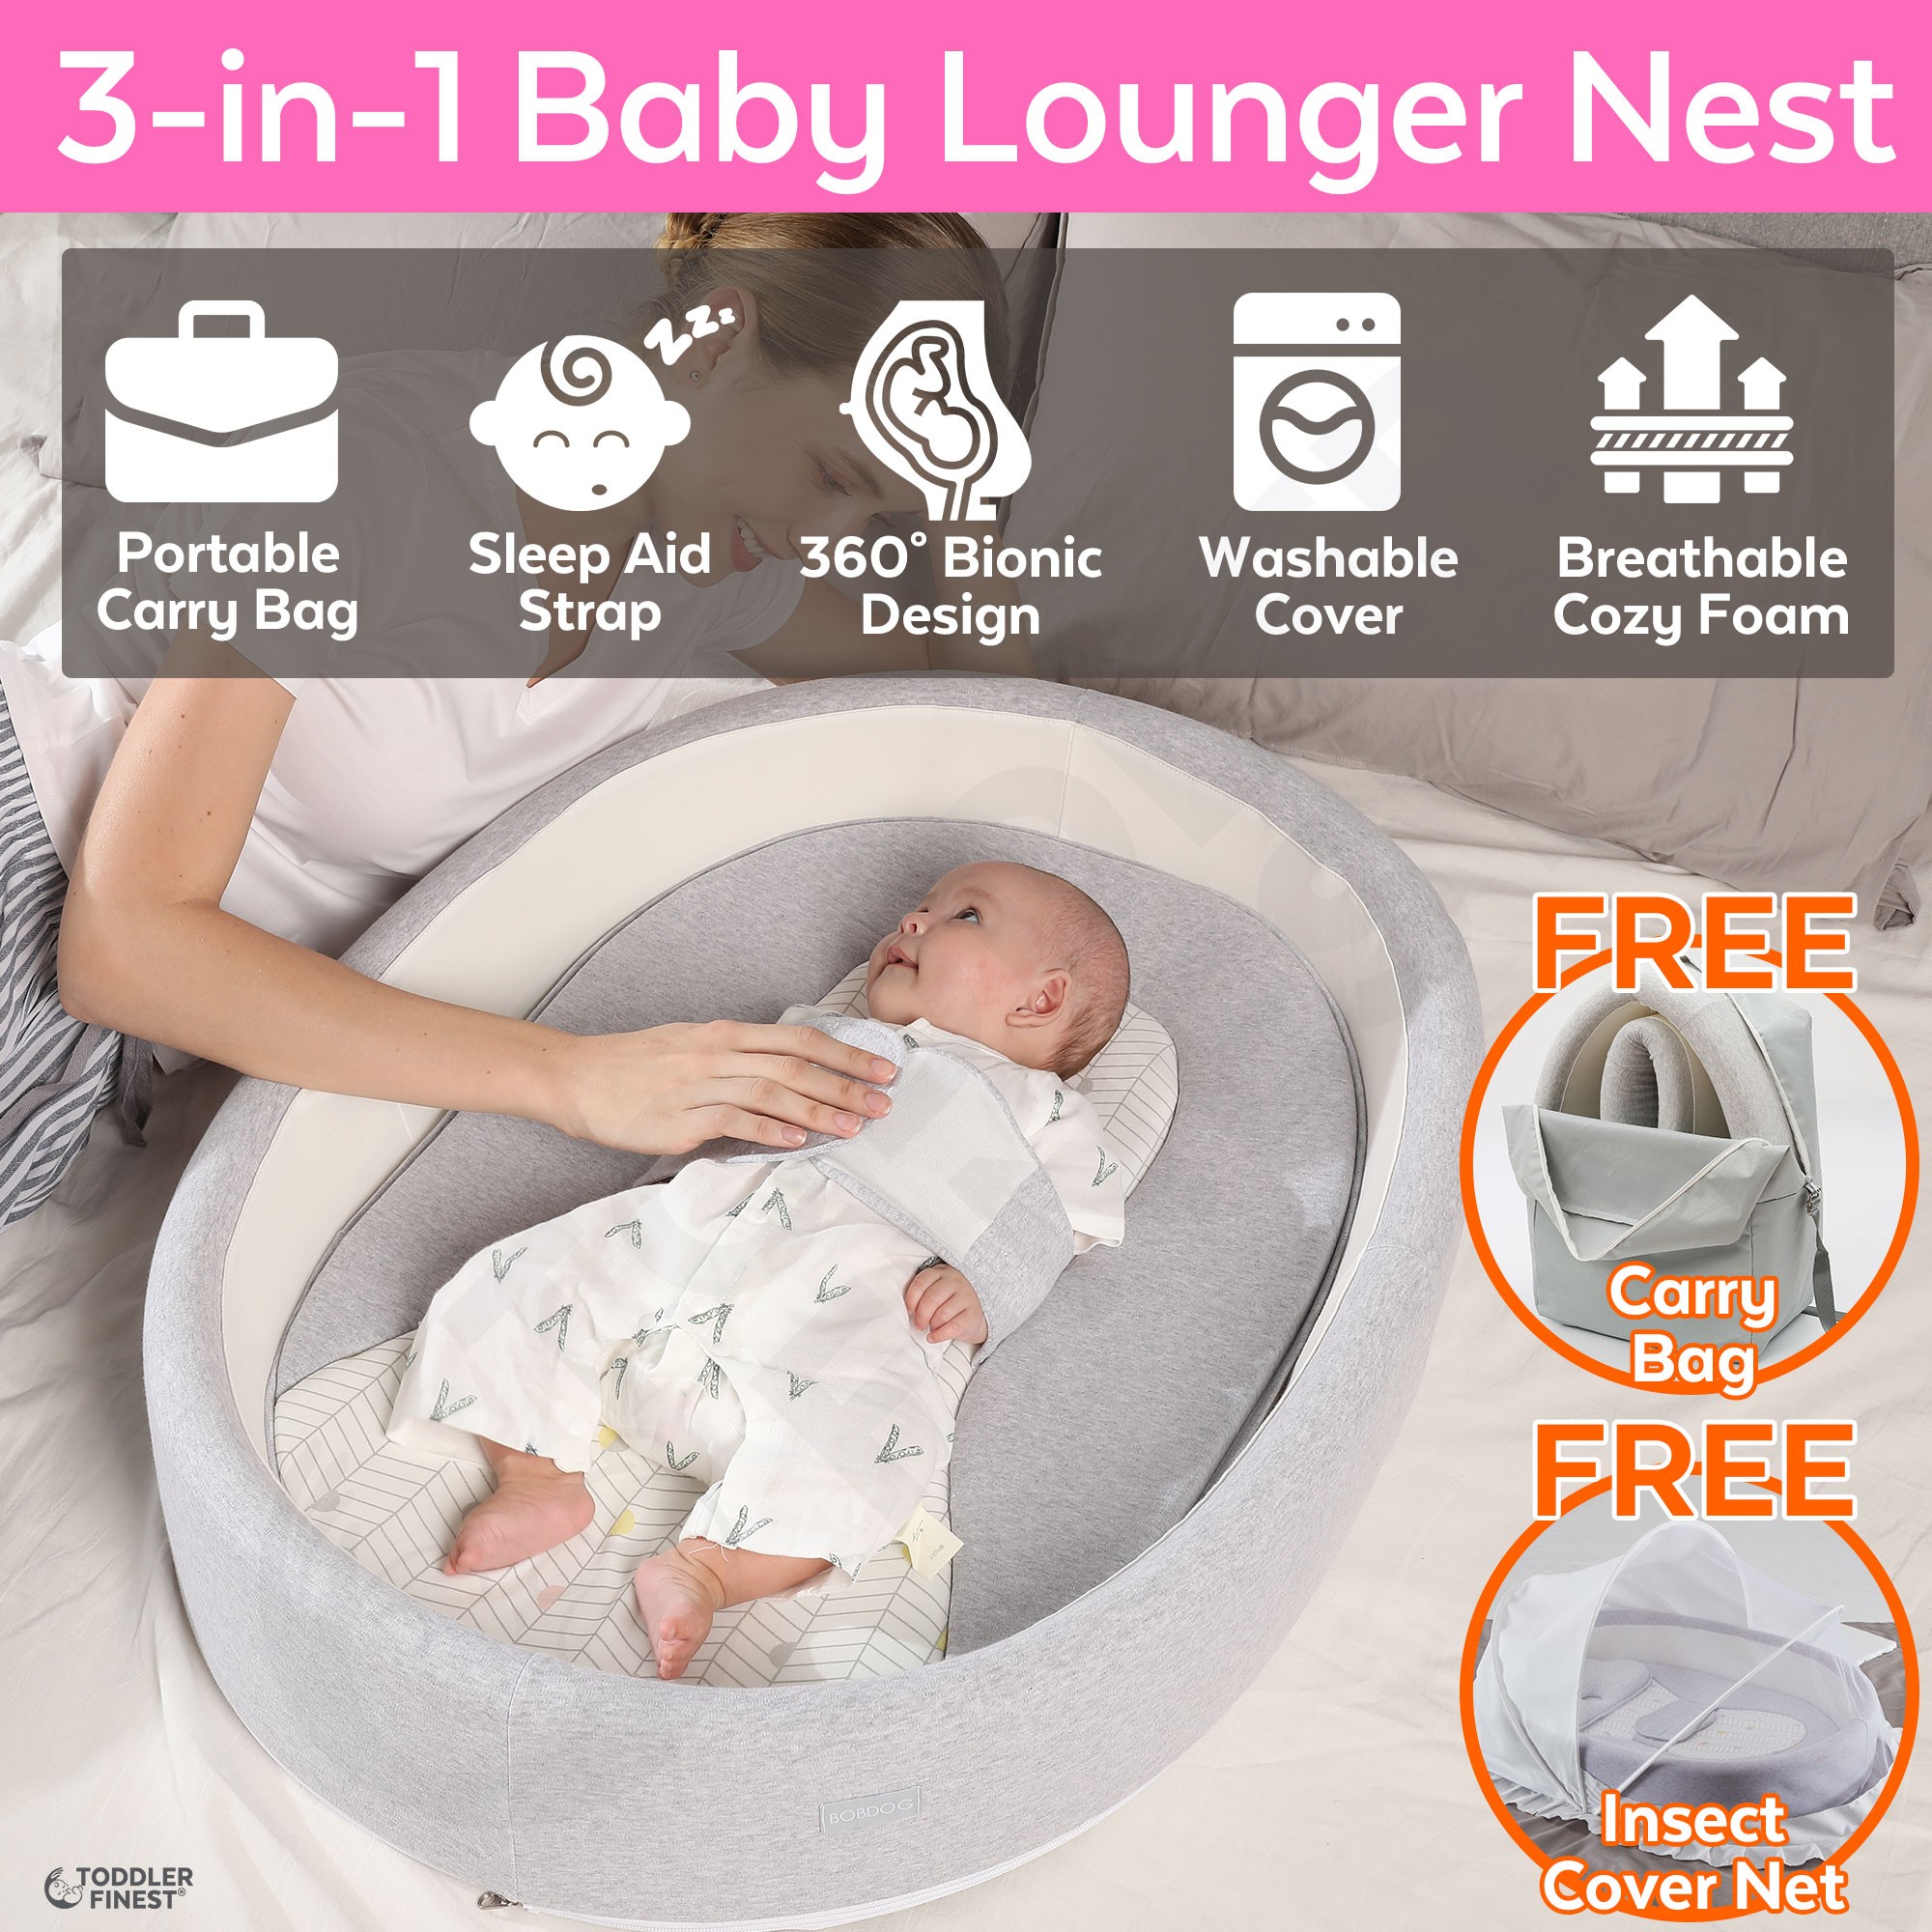 Hot Soft Cotton Portable Detachable Newborn Bed Baby Bassinet Baby Lounger Baby Nest with Mattresses for Infant 